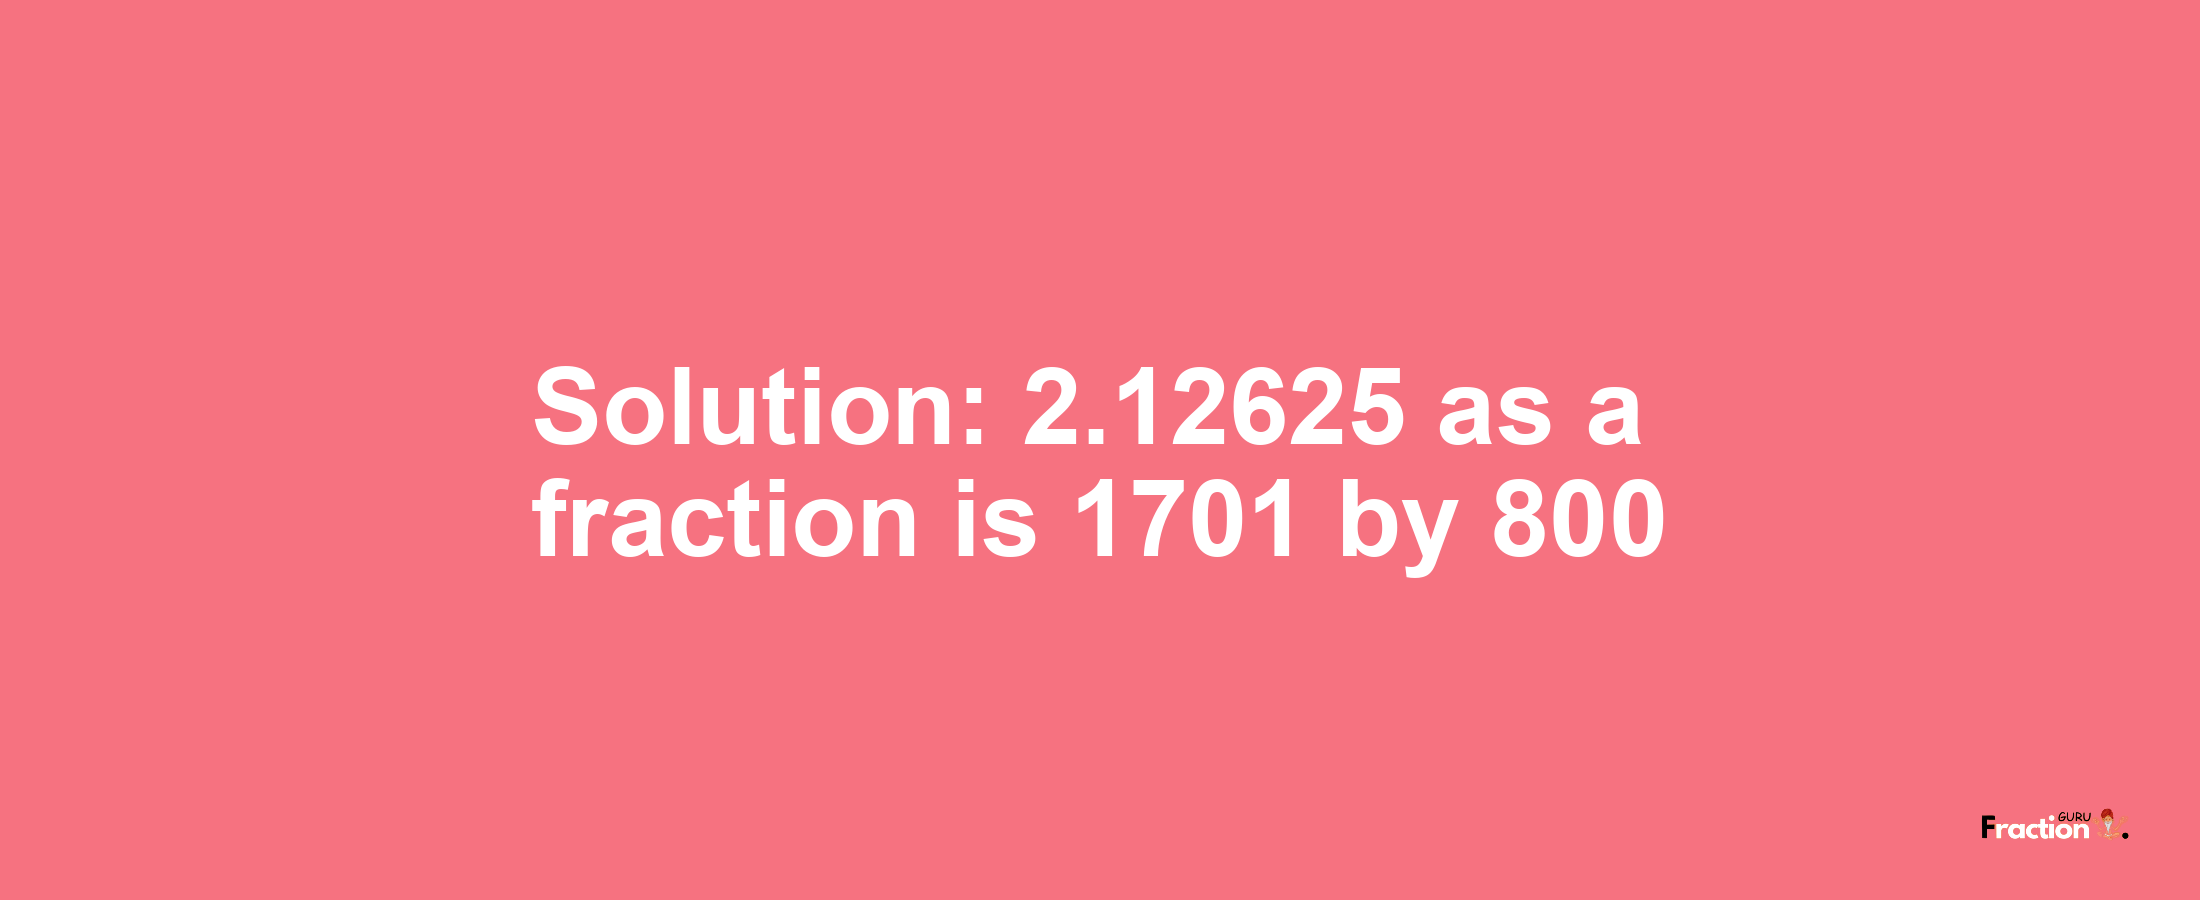 Solution:2.12625 as a fraction is 1701/800